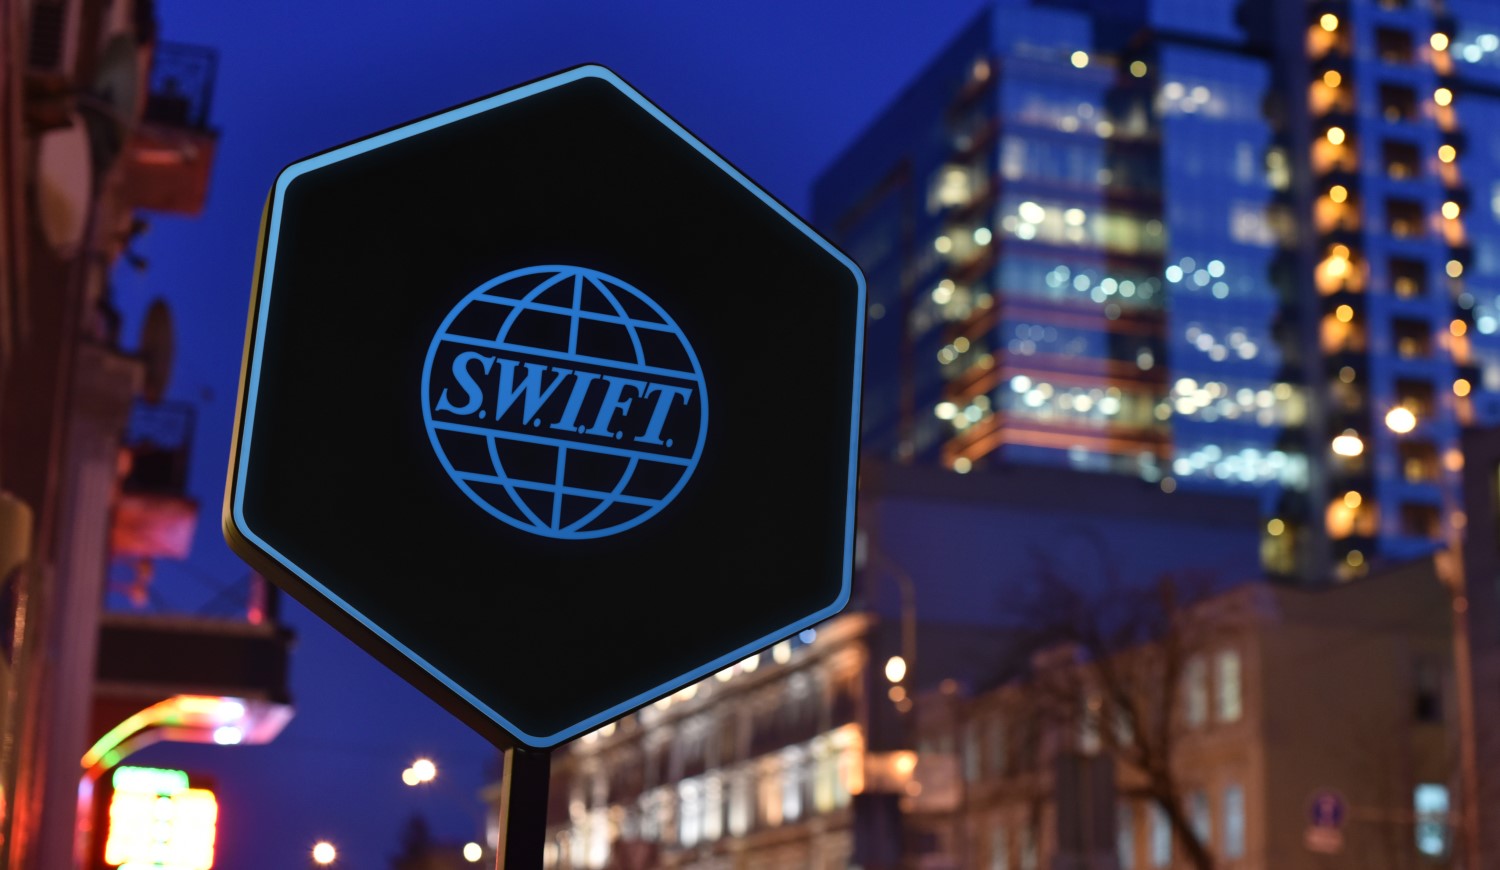 SWIFT Teams Up With Major Banks, SGX To Trial Blockchain Voting